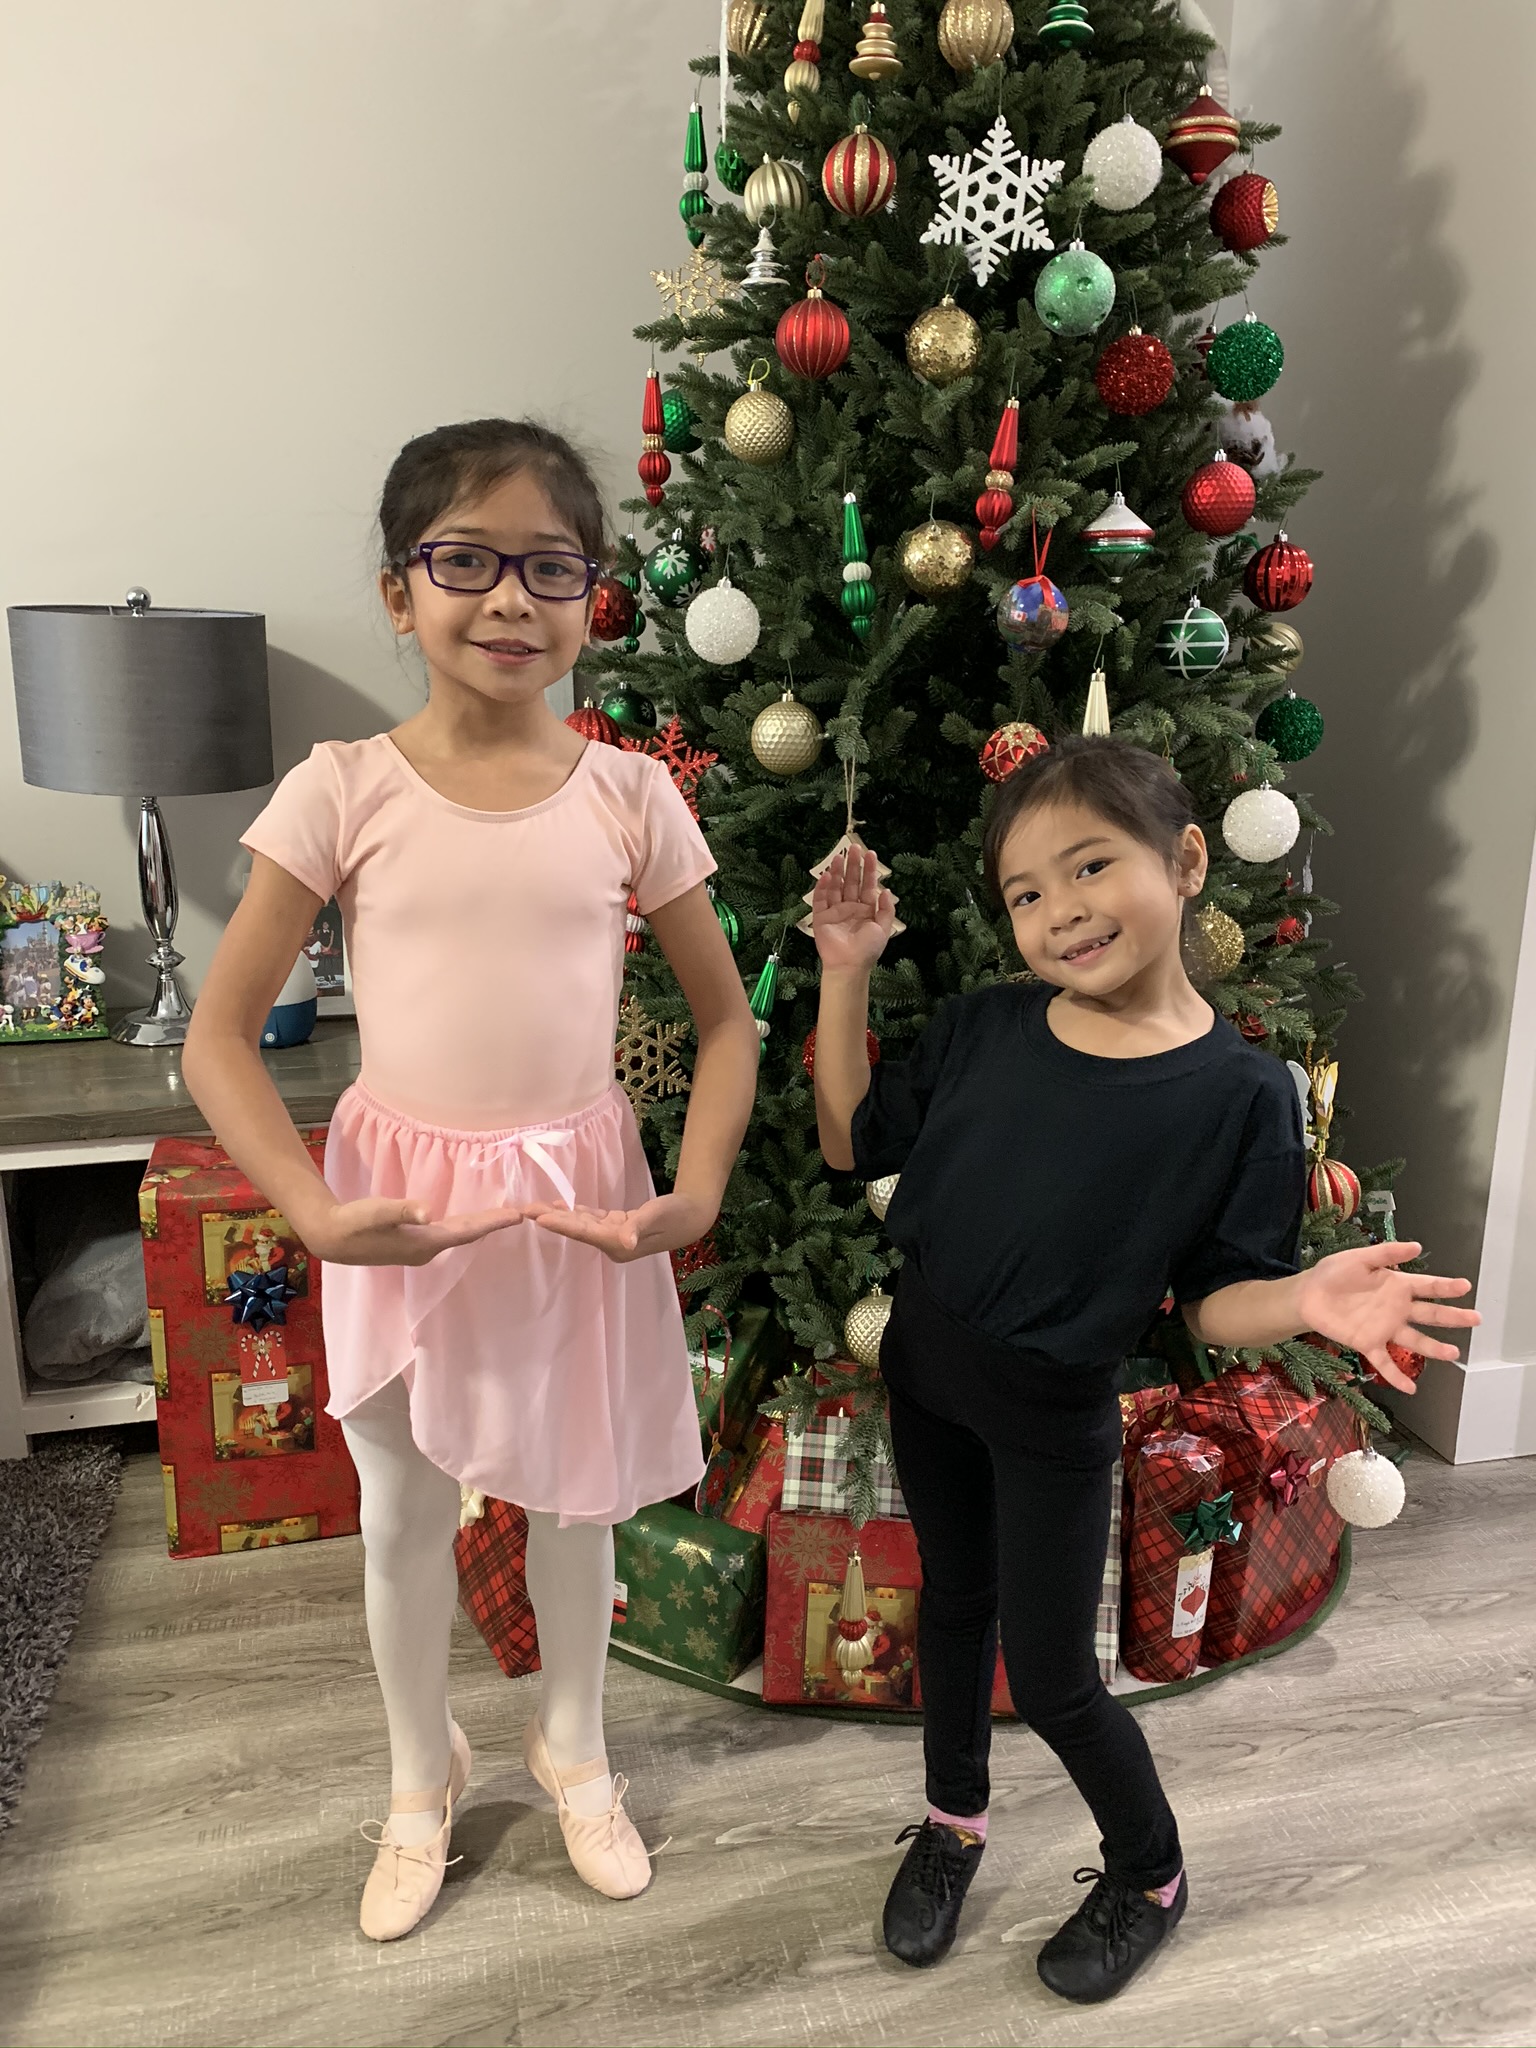 School of music and dance, Dance lessons, First experience with dance lessons, First experience with dance, Pre-jazz and Hip-hop dance, Ballet, Hip-hop dance lessons, Ballet dance lessons, bethalylovebeauty